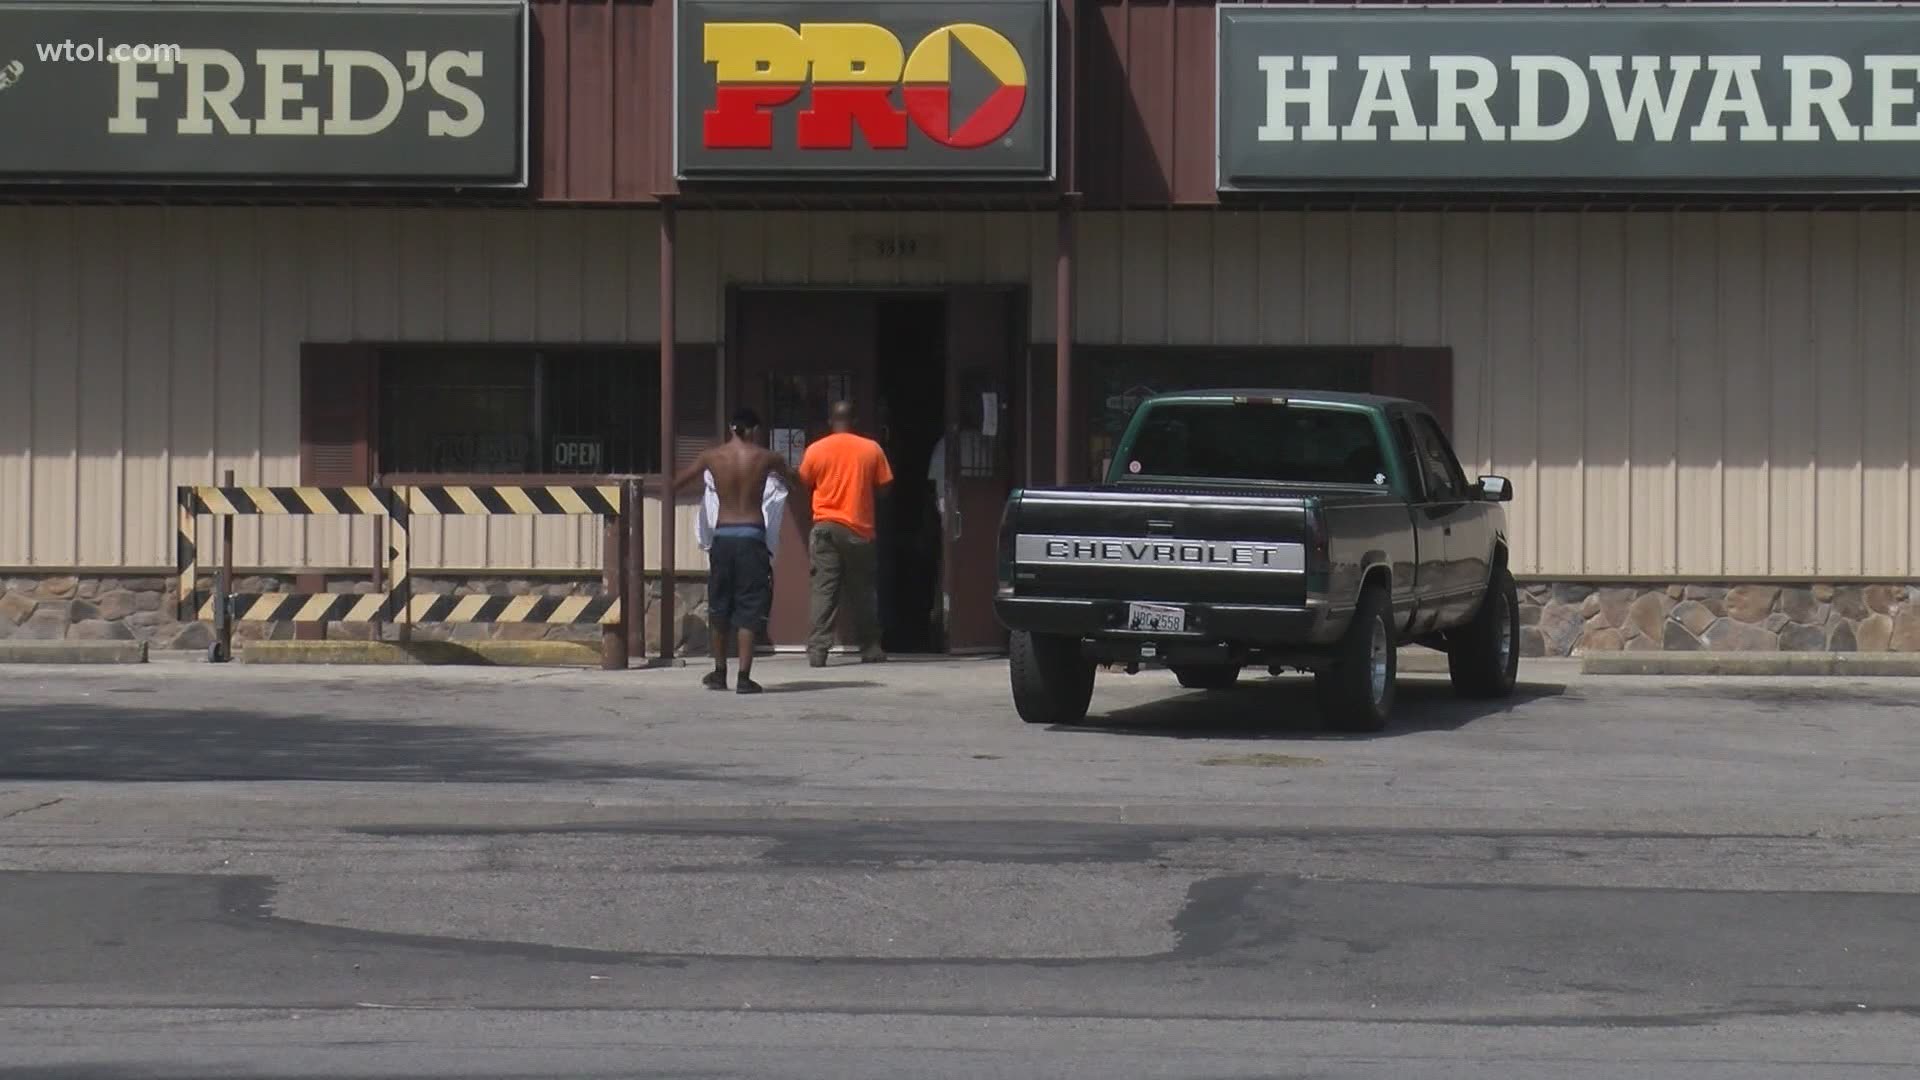 Fred's Pro Hardware on Stickney Ave has been a neighborhood hardware store in north Toledo for more than 67 years.